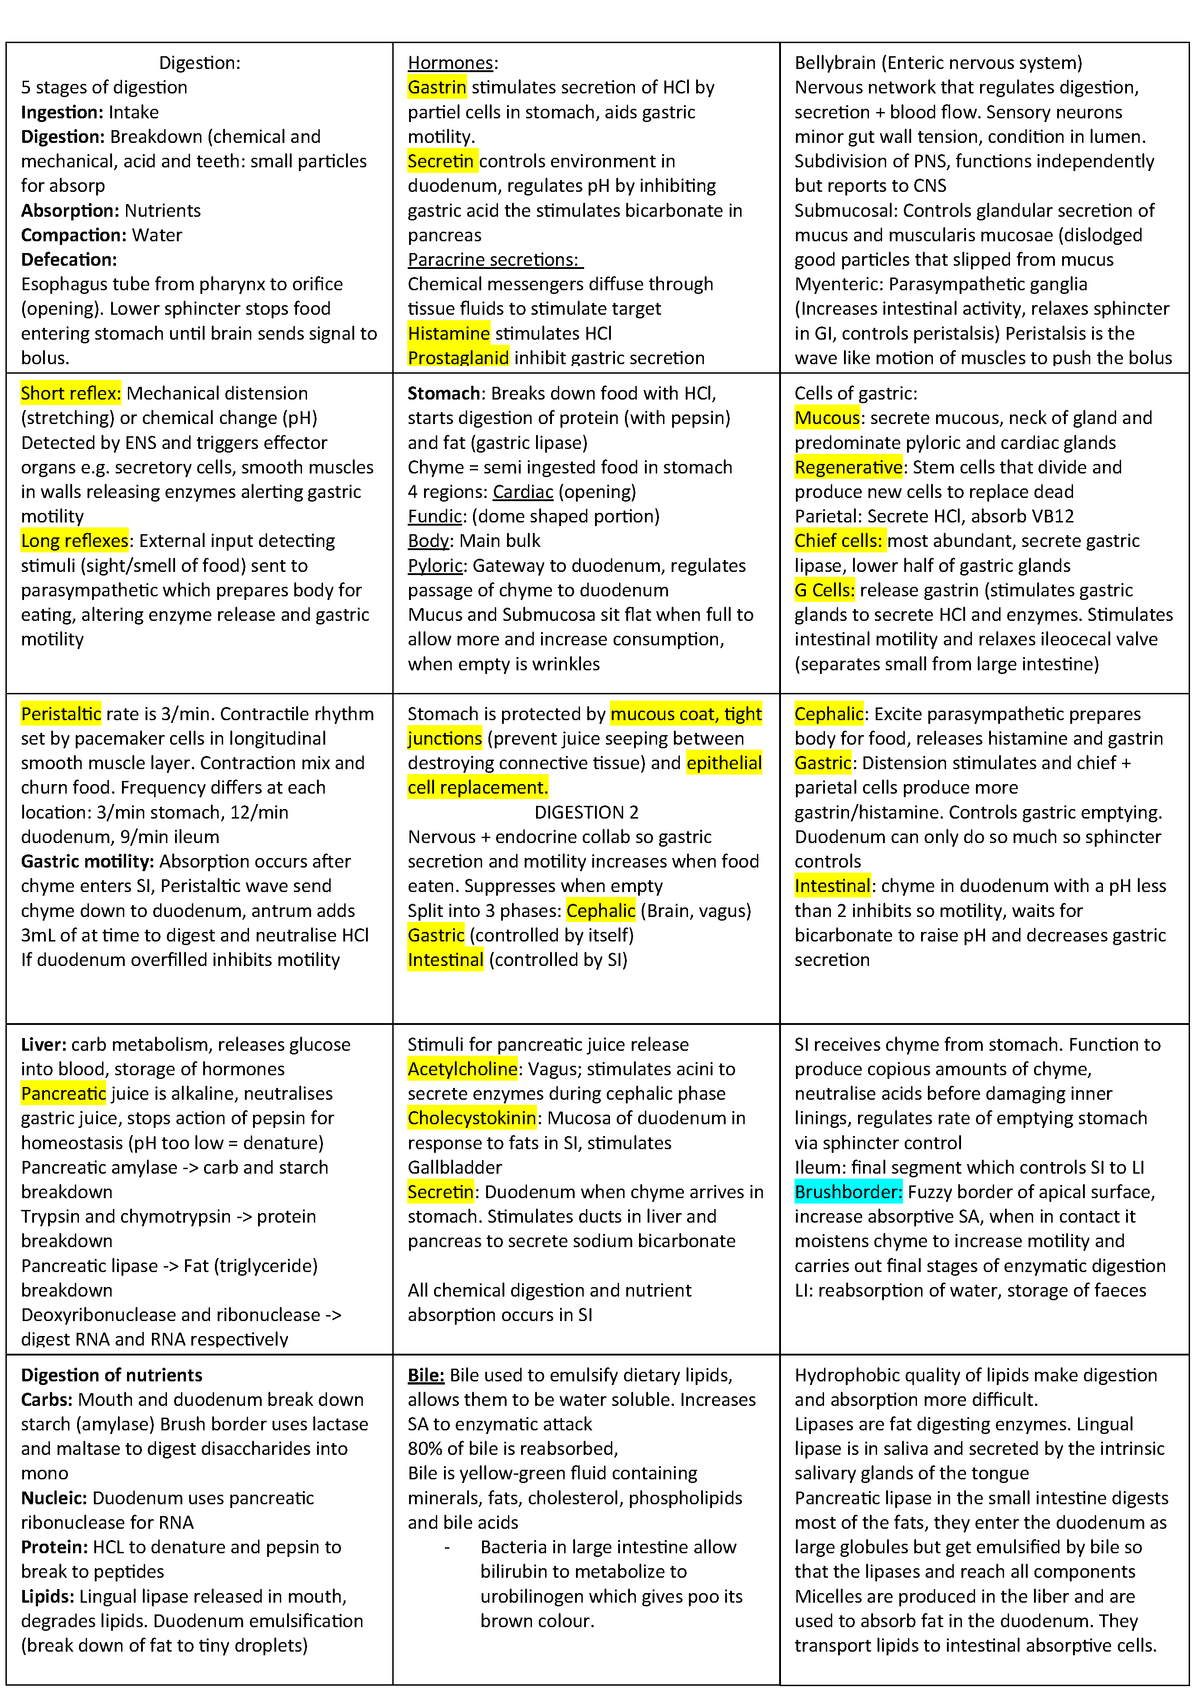 Anatomy Physiology Cheat Sheet Pdf Integumentary System Functions | Hot ...